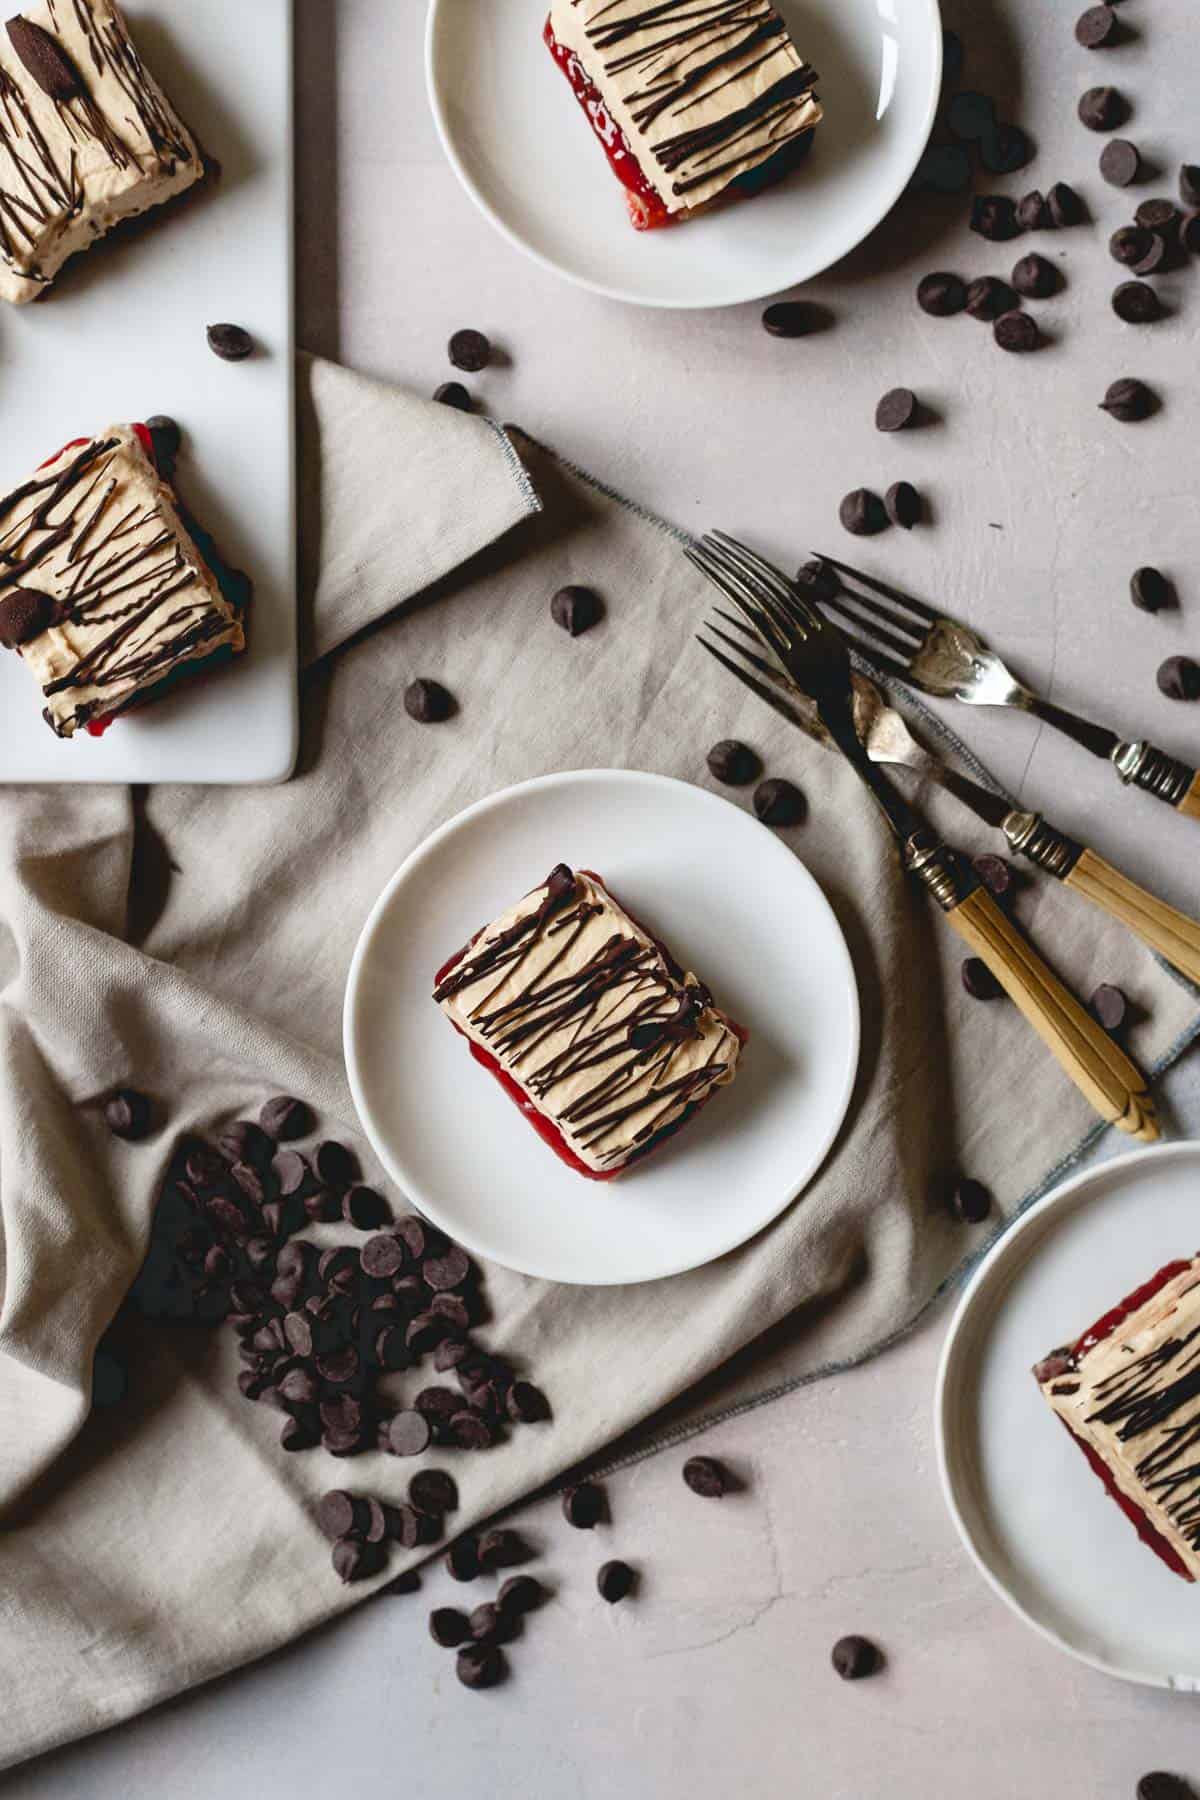 The classic combination of peanut butter and jelly combine in these frozen yogurt bars studded with dark chocolate chips and a chocolate drizzle!